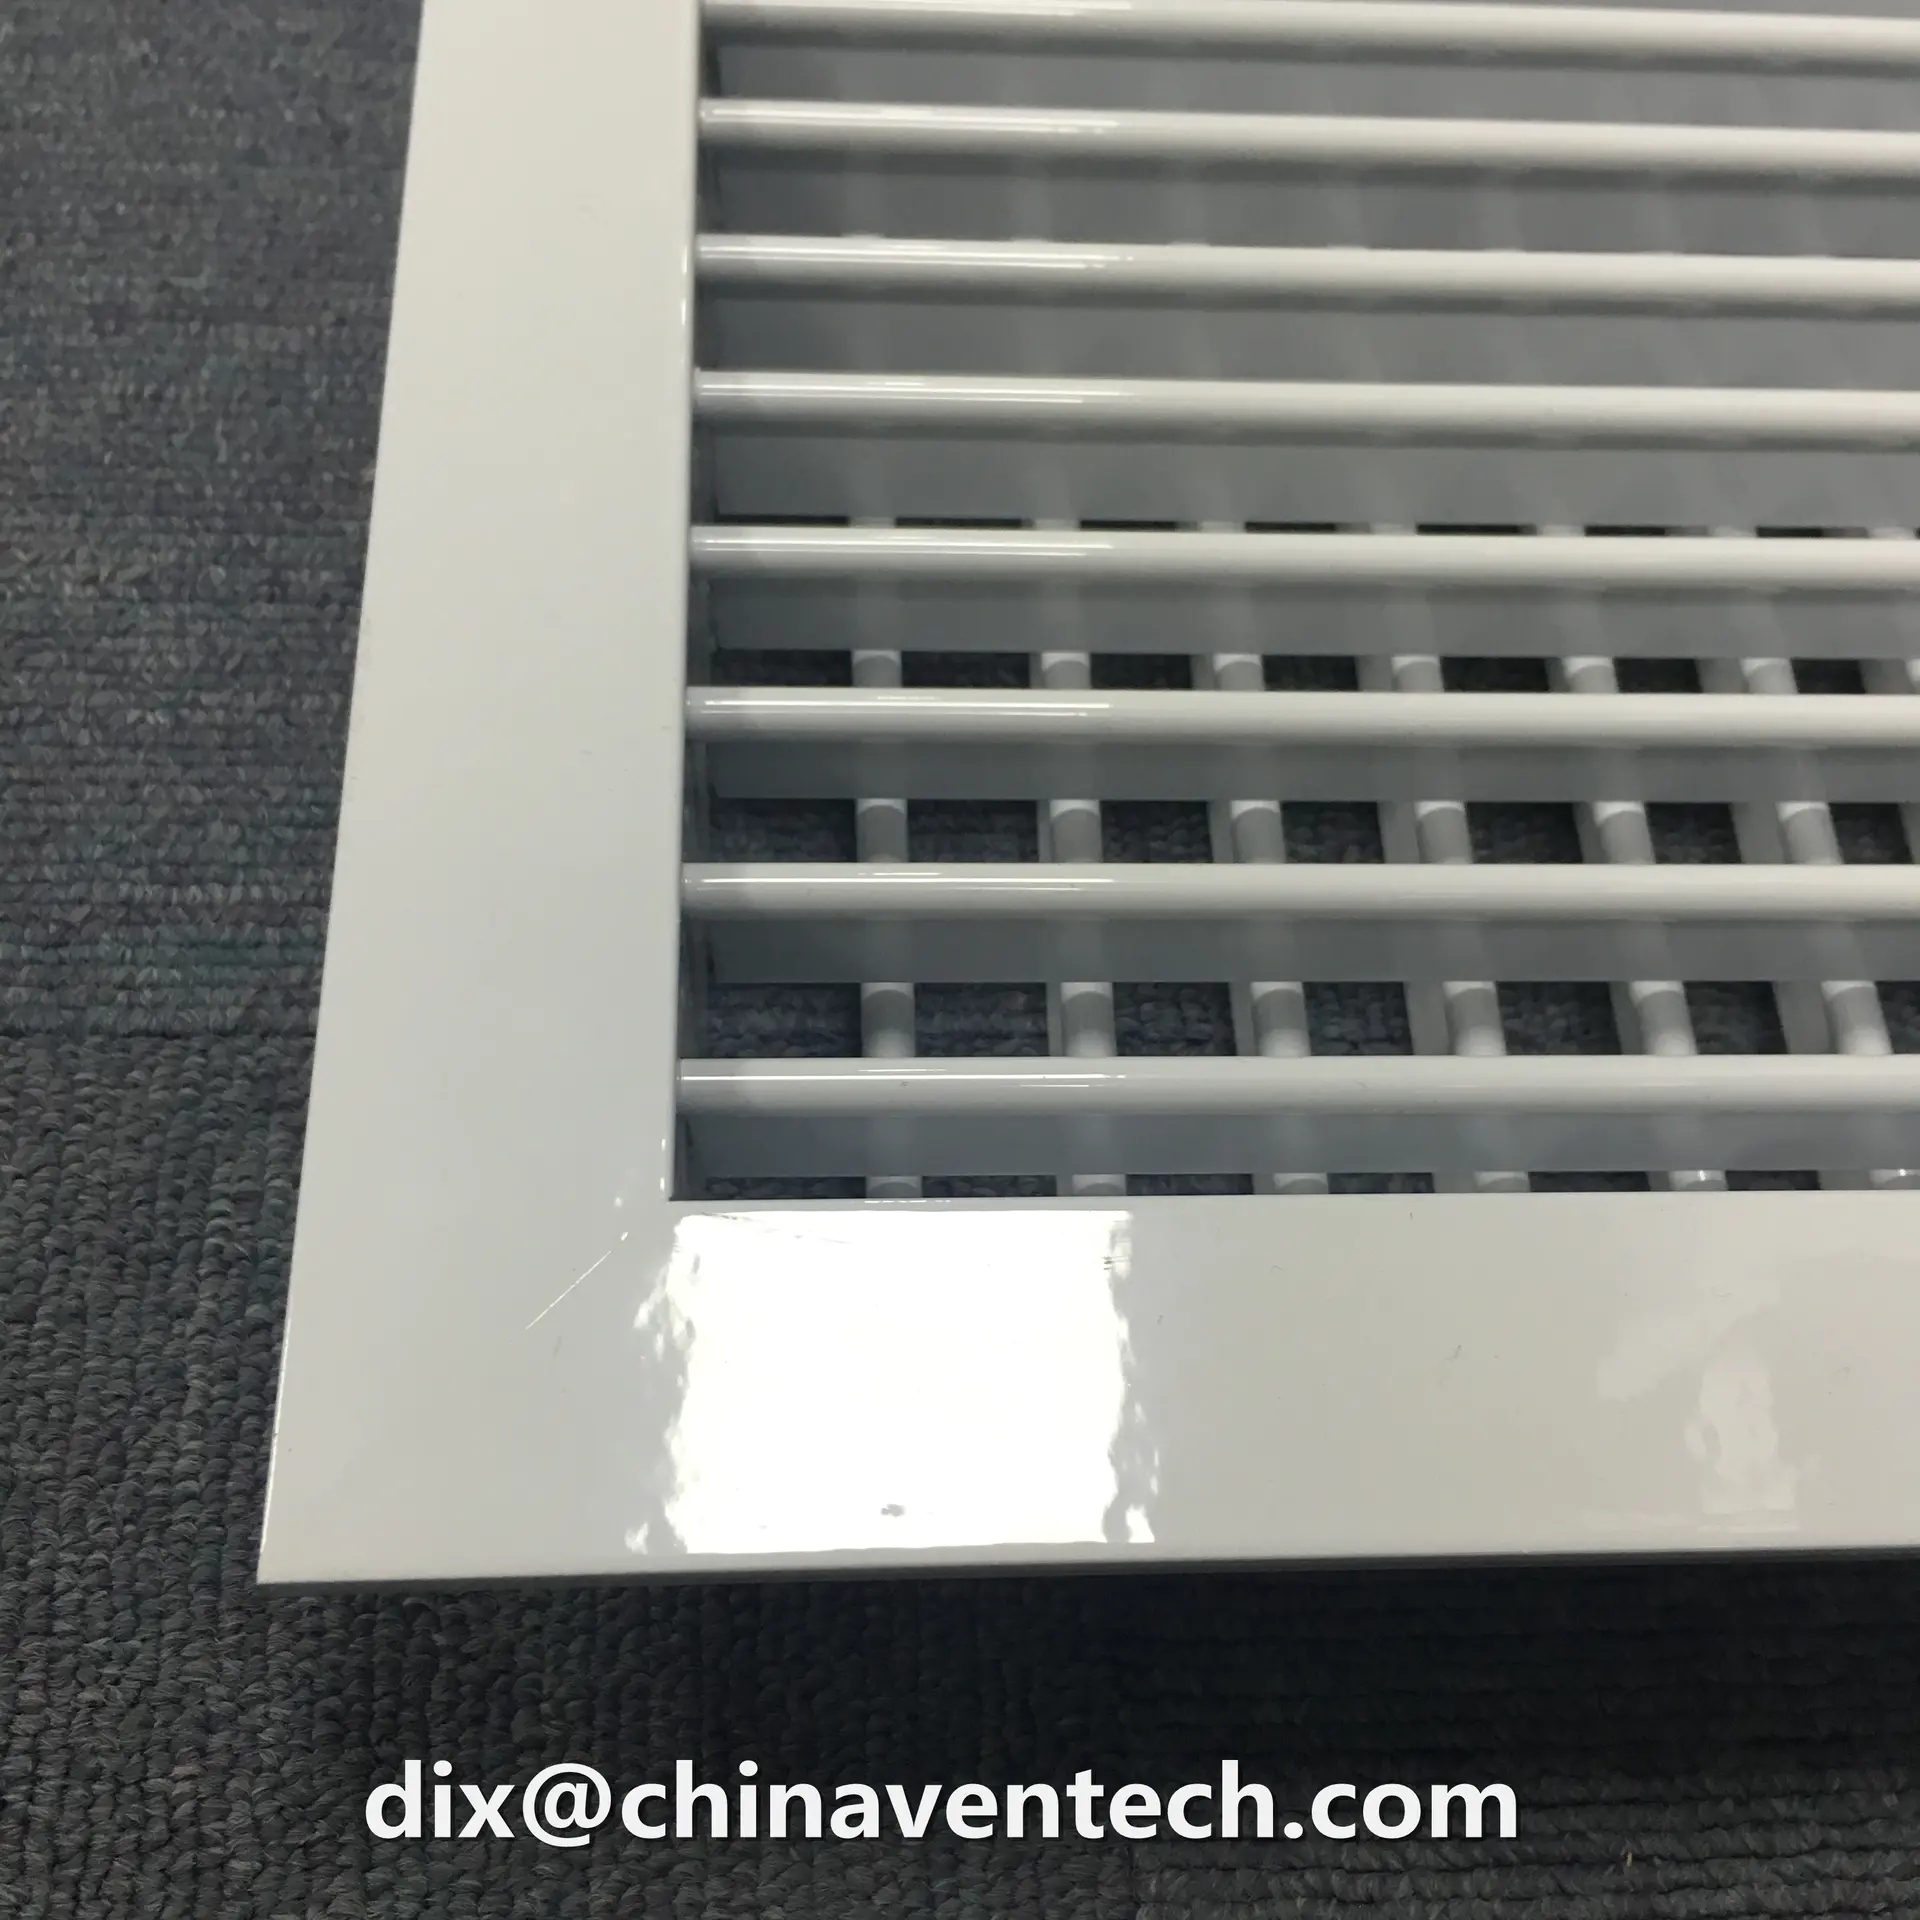 System Hvac Duct Cover Ceiling Supply Aluminum Conditioning Air Grille For Ventilation